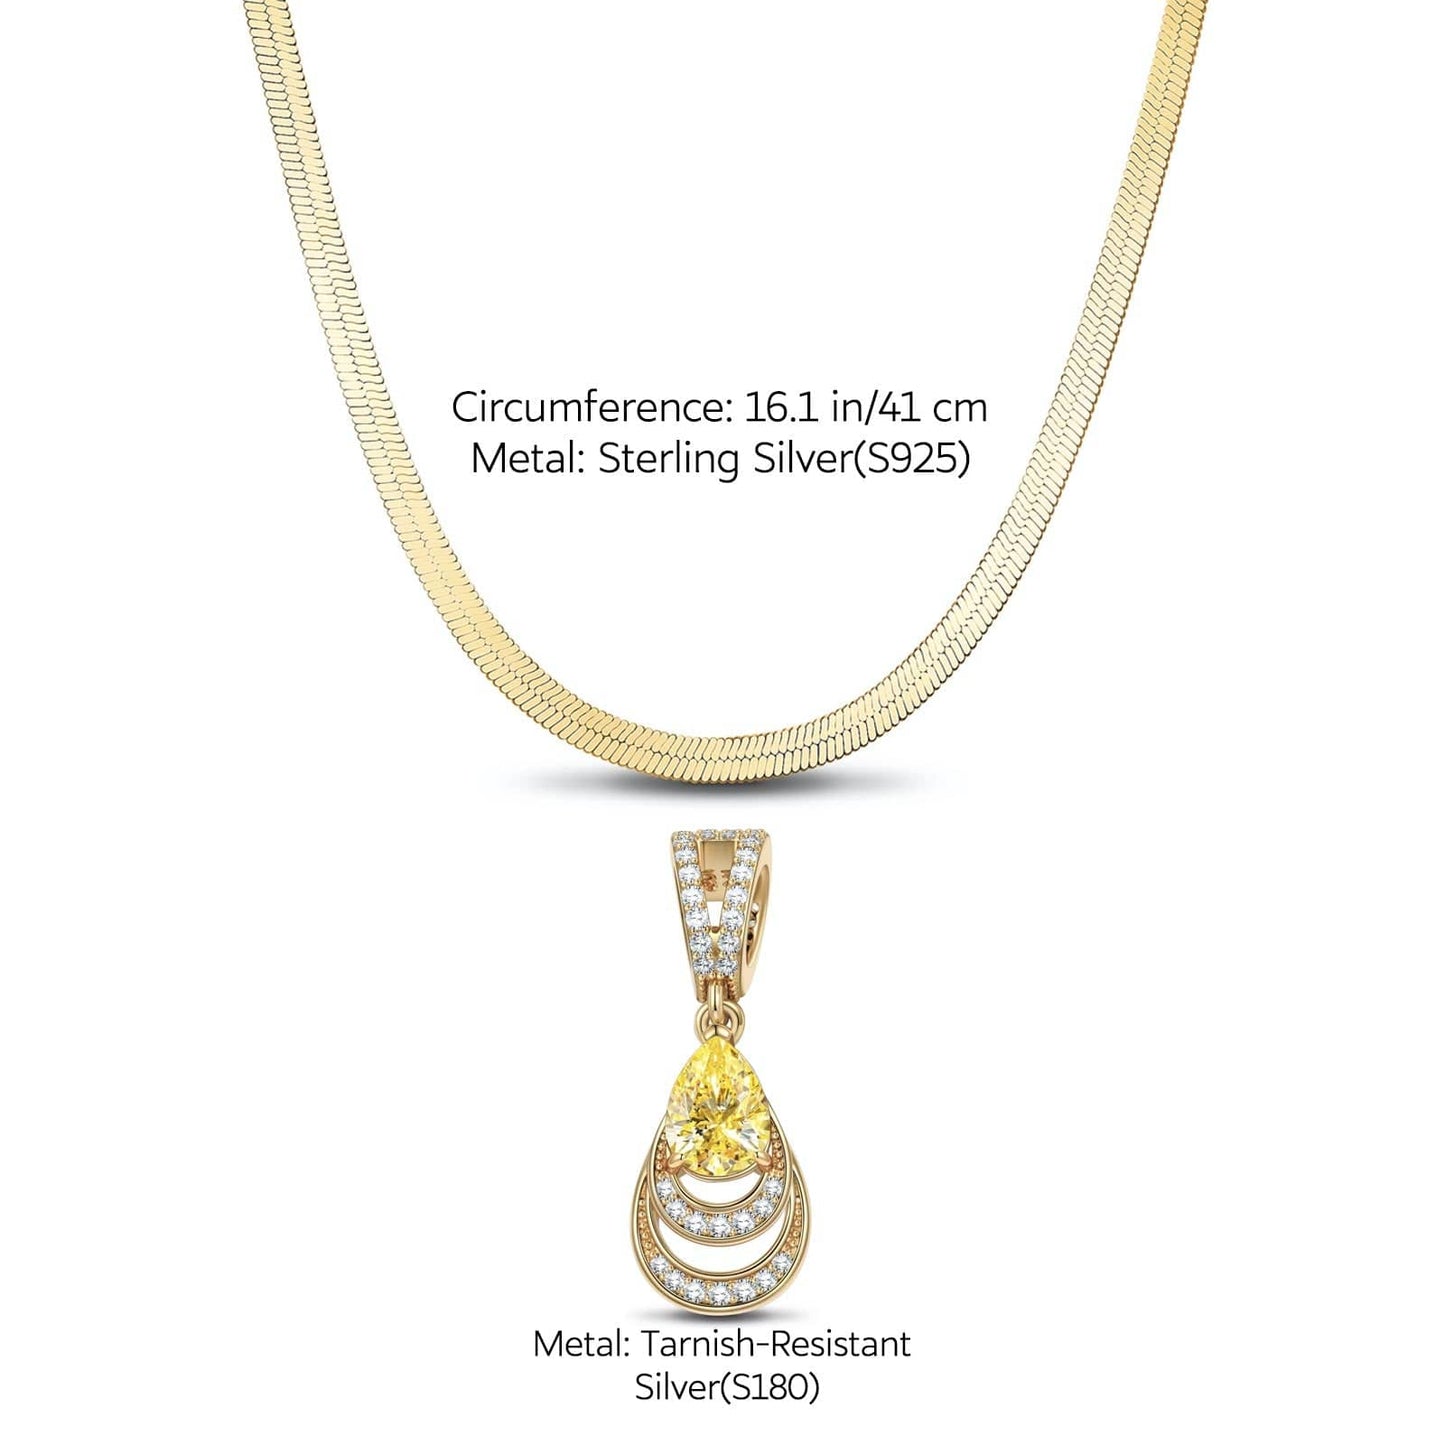 Sterling Silver Flat Snake Chain Mermaid's Tear Charms Necklace Set In 14K Gold Plated